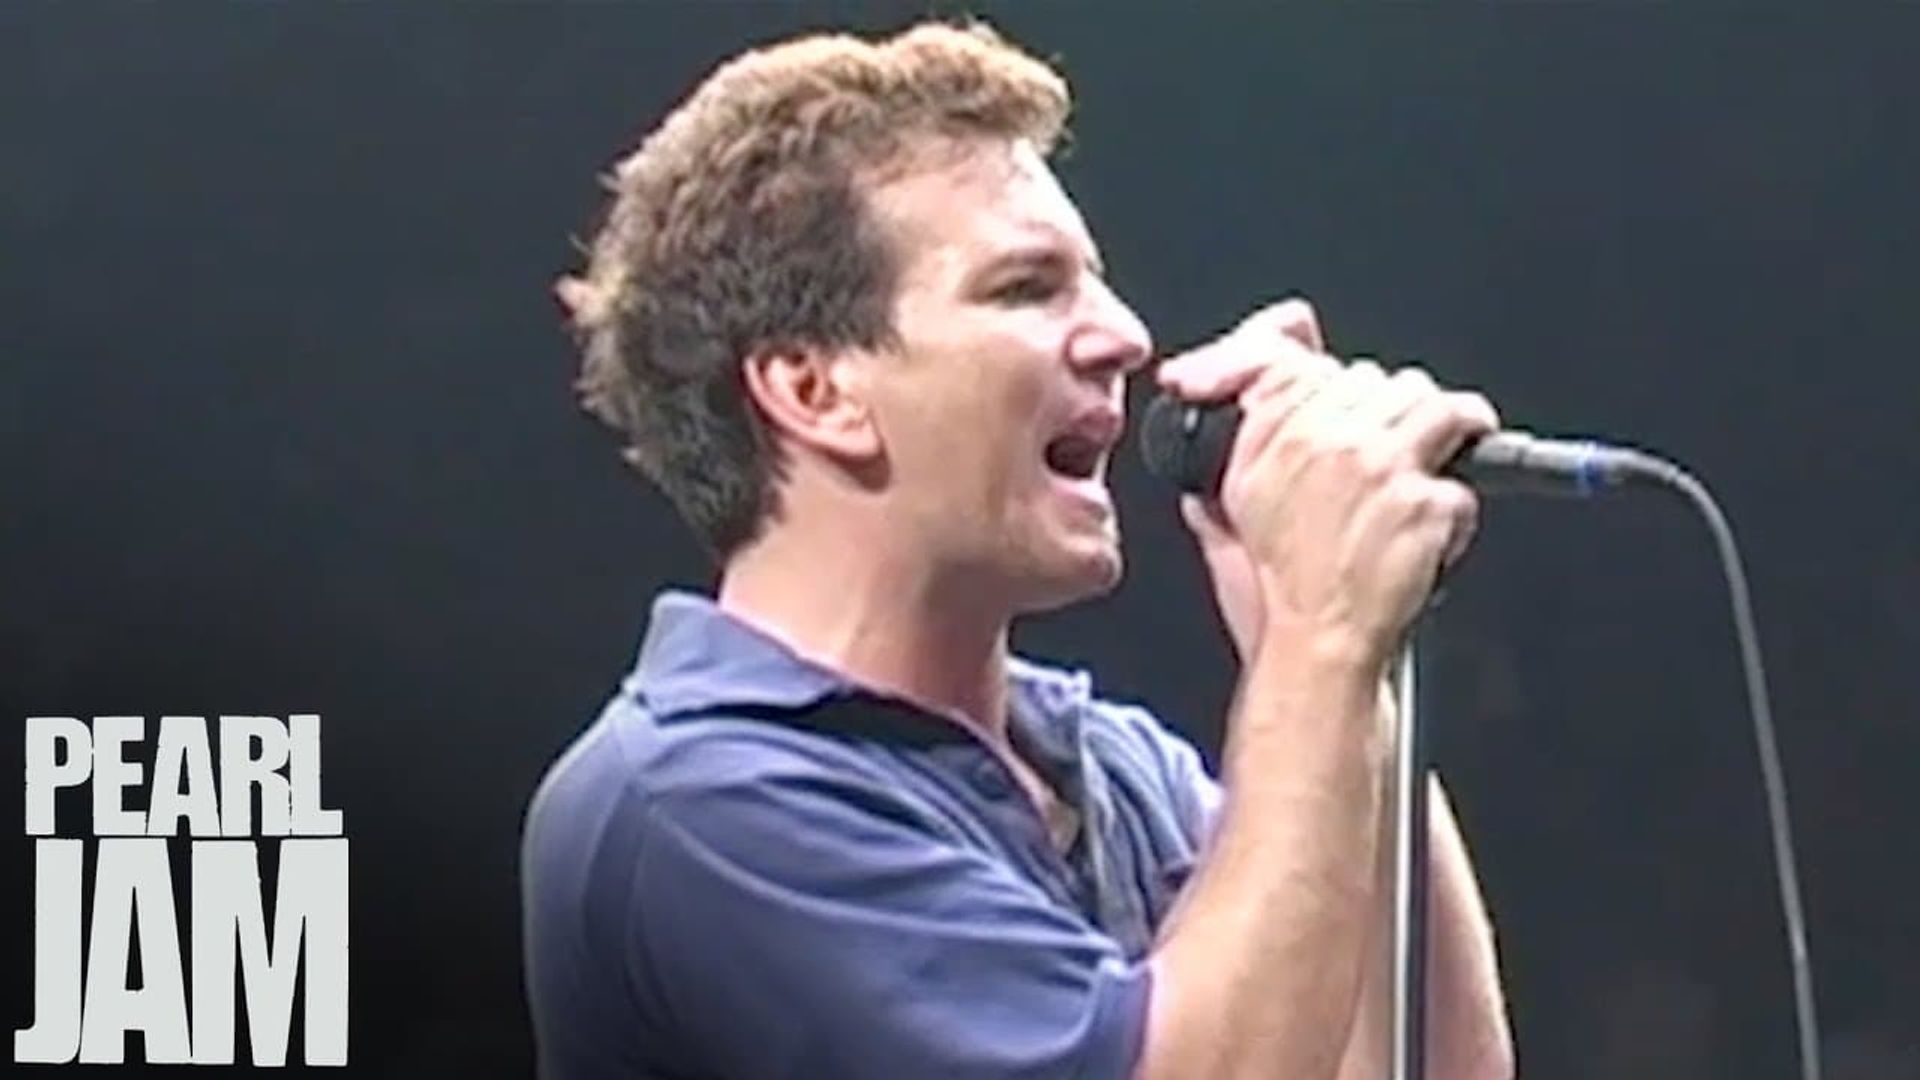 Pearl Jam: Live at the Garden background